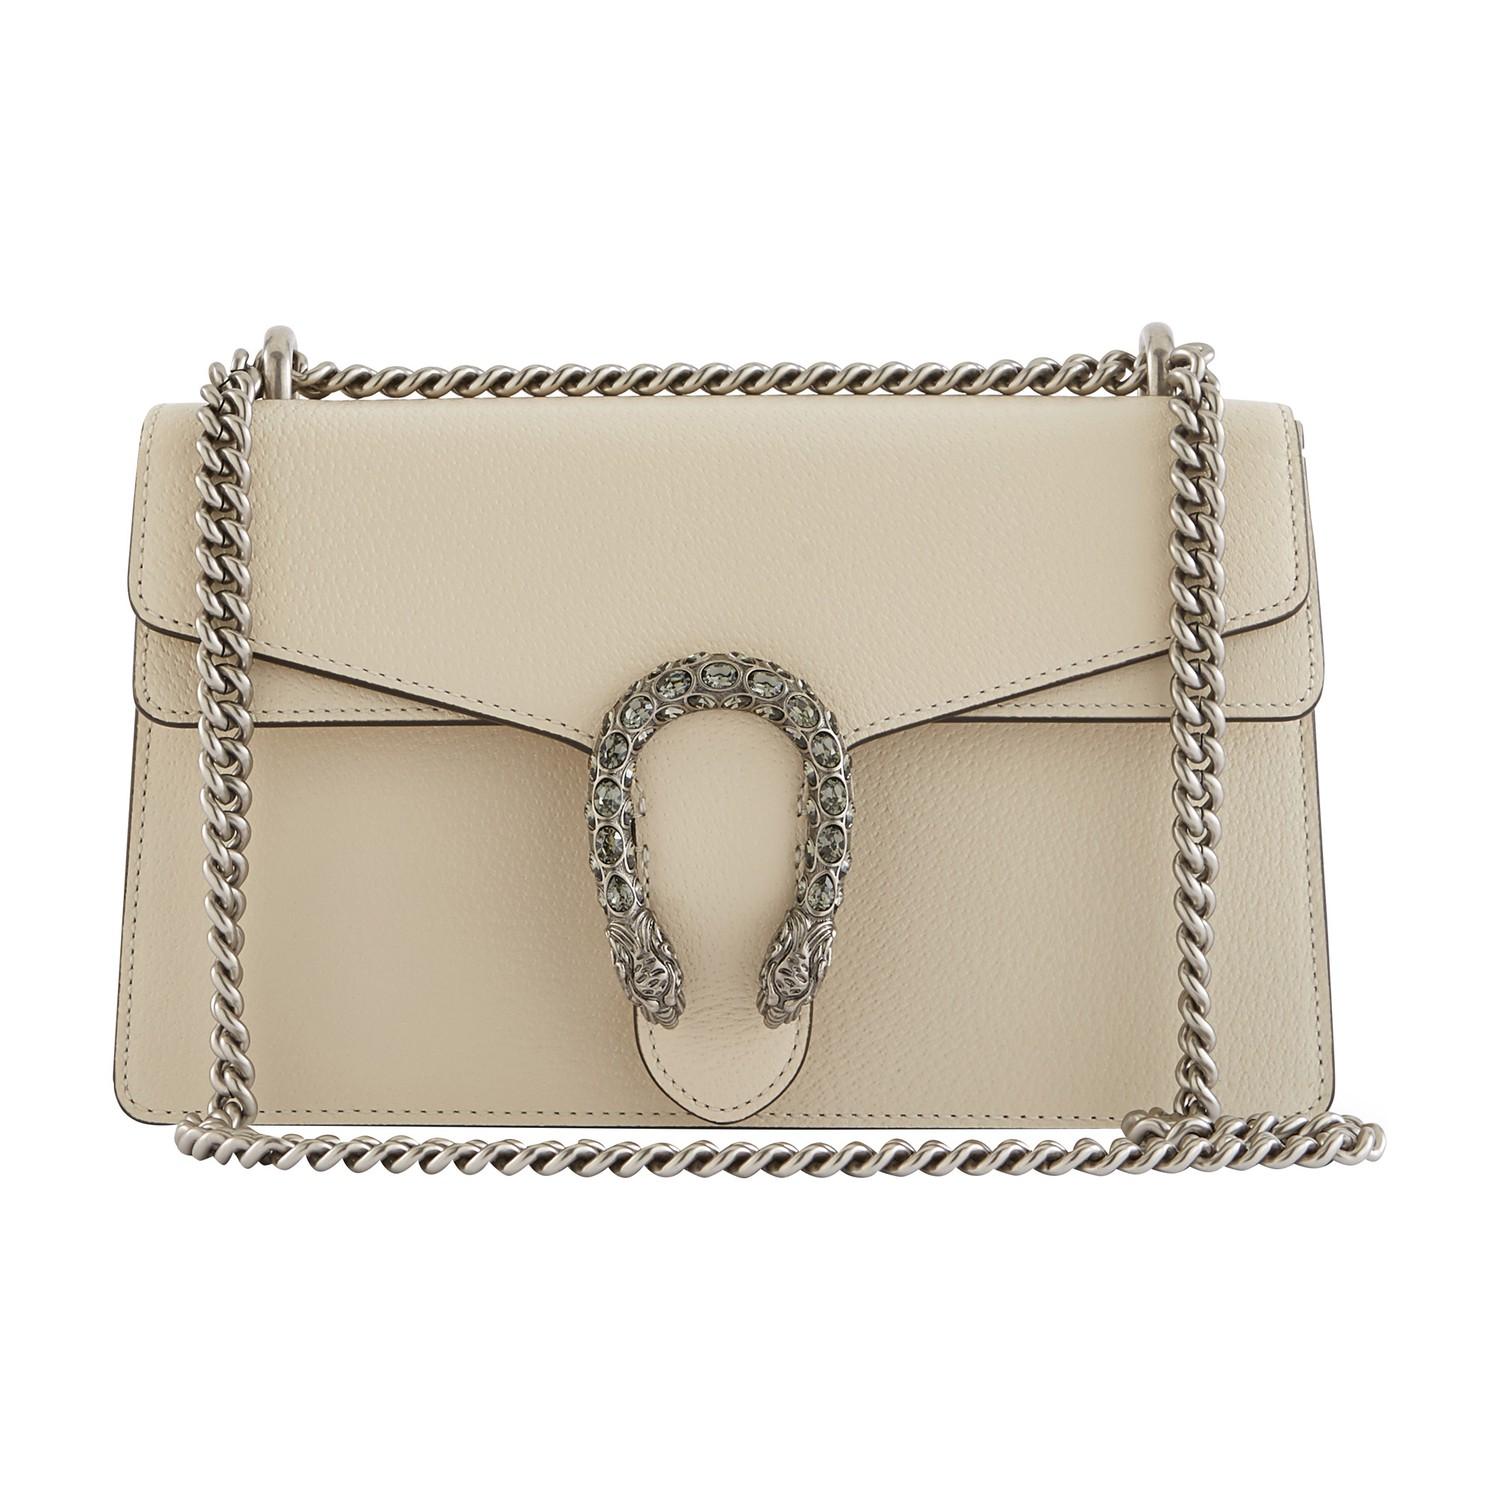 Gucci Leather Dionysus Shoulder Bag in White - Lyst